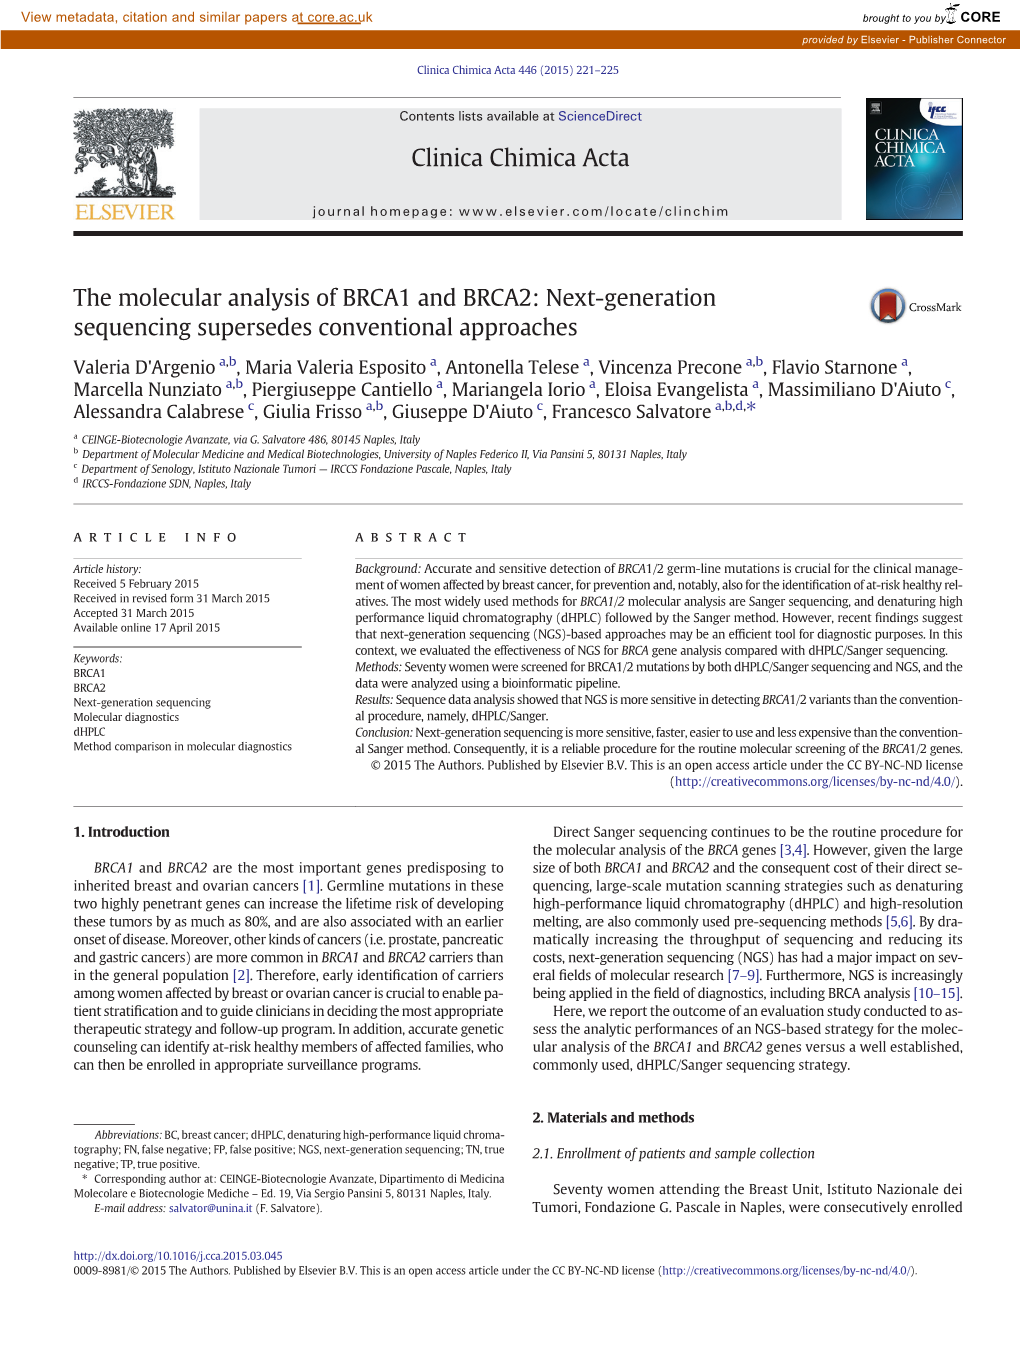 The Molecular Analysis of BRCA1 and BRCA2: Next-Generation Sequencing Supersedes Conventional Approaches